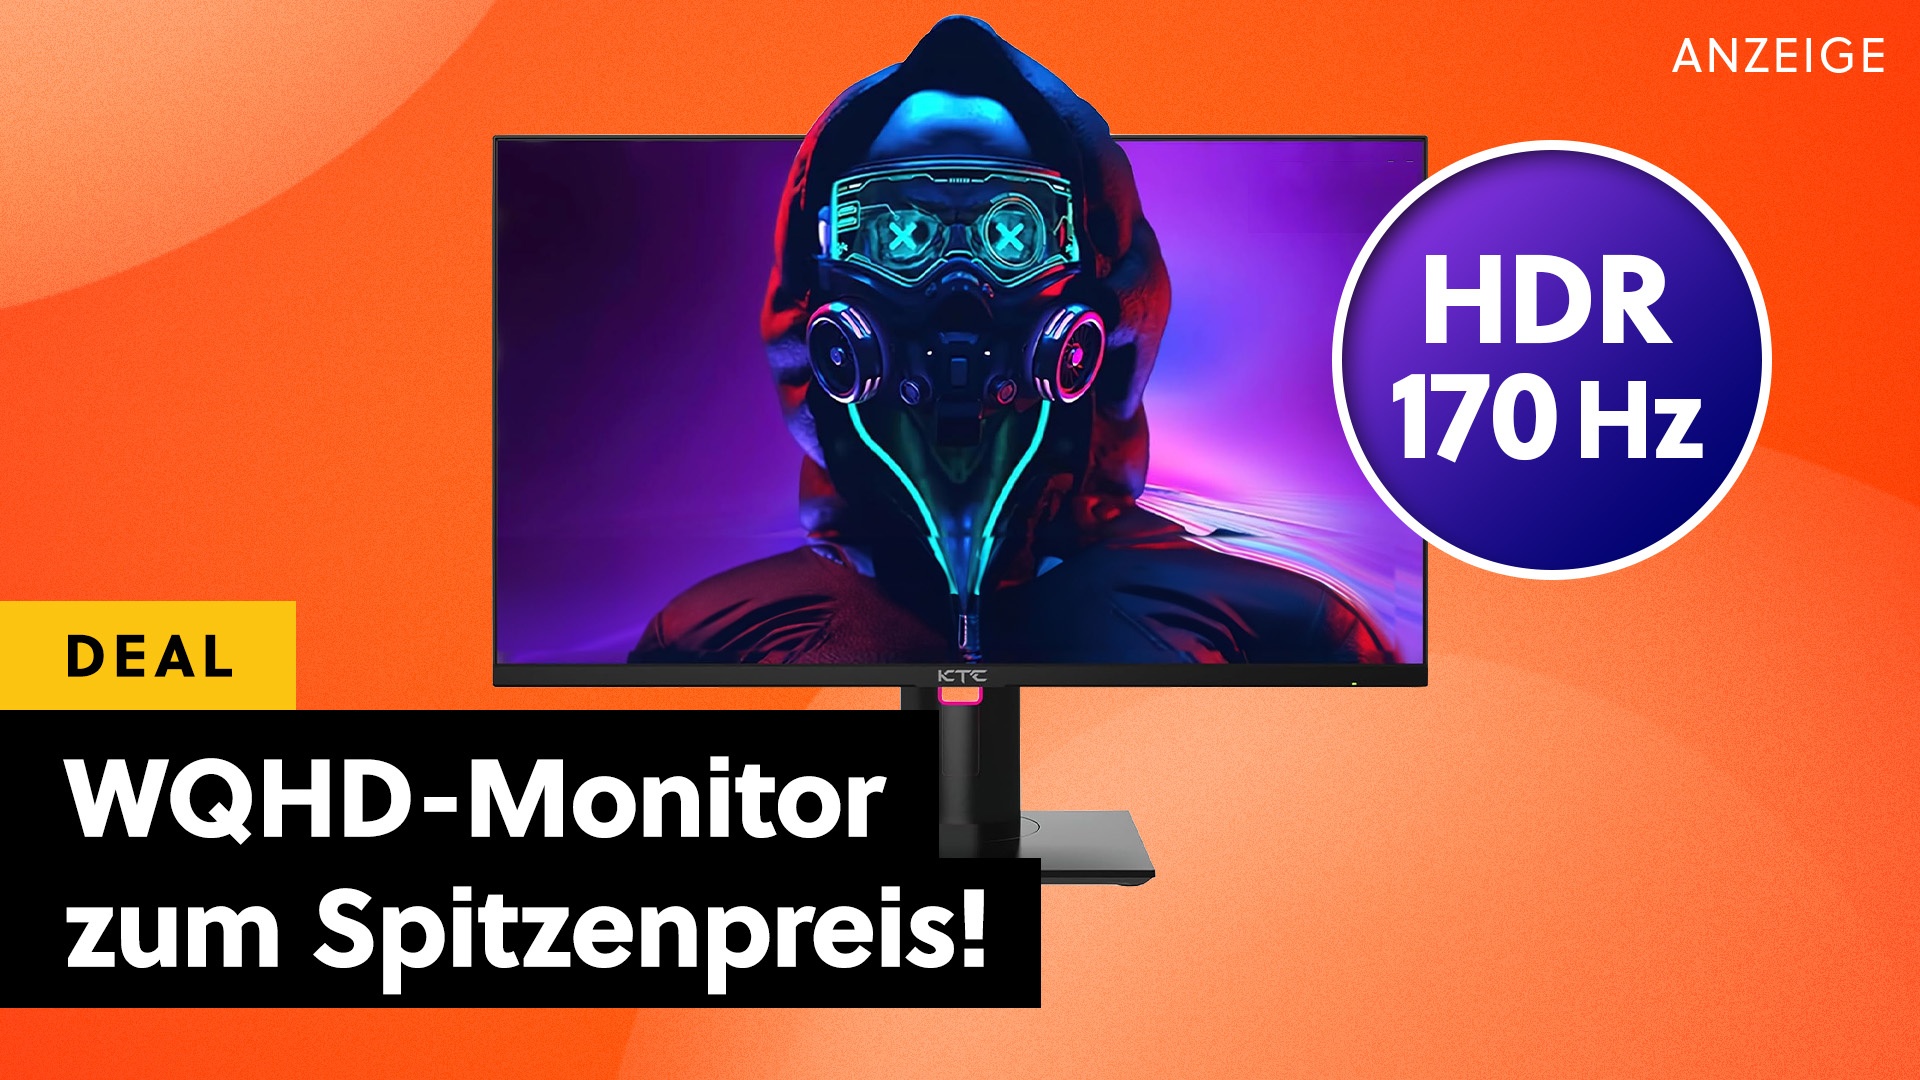 So many gaming monitors for so little money!  A 27-inch WQHD monitor with over 144Hz and HDR costs incredibly little